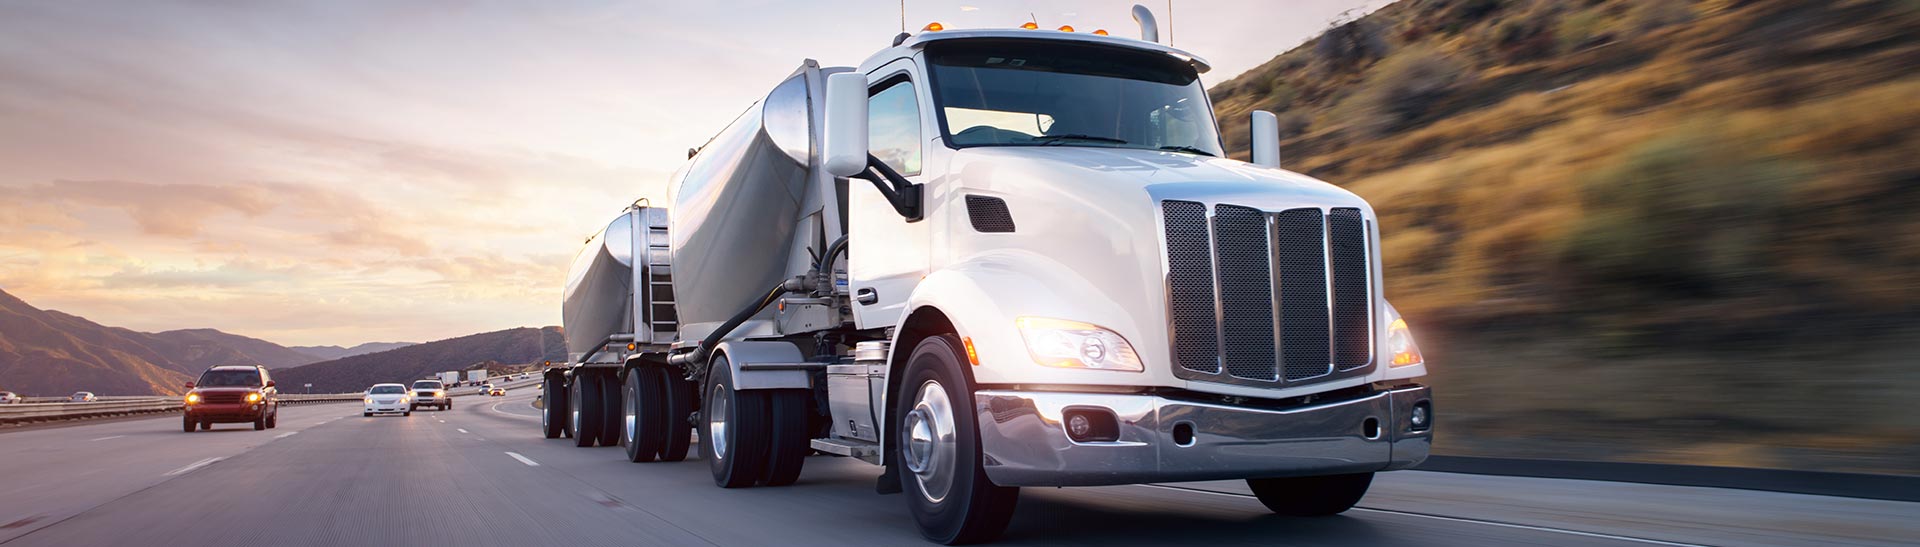 Milledgeville Trucking Company, Trucking Services and Long Haul Trucking